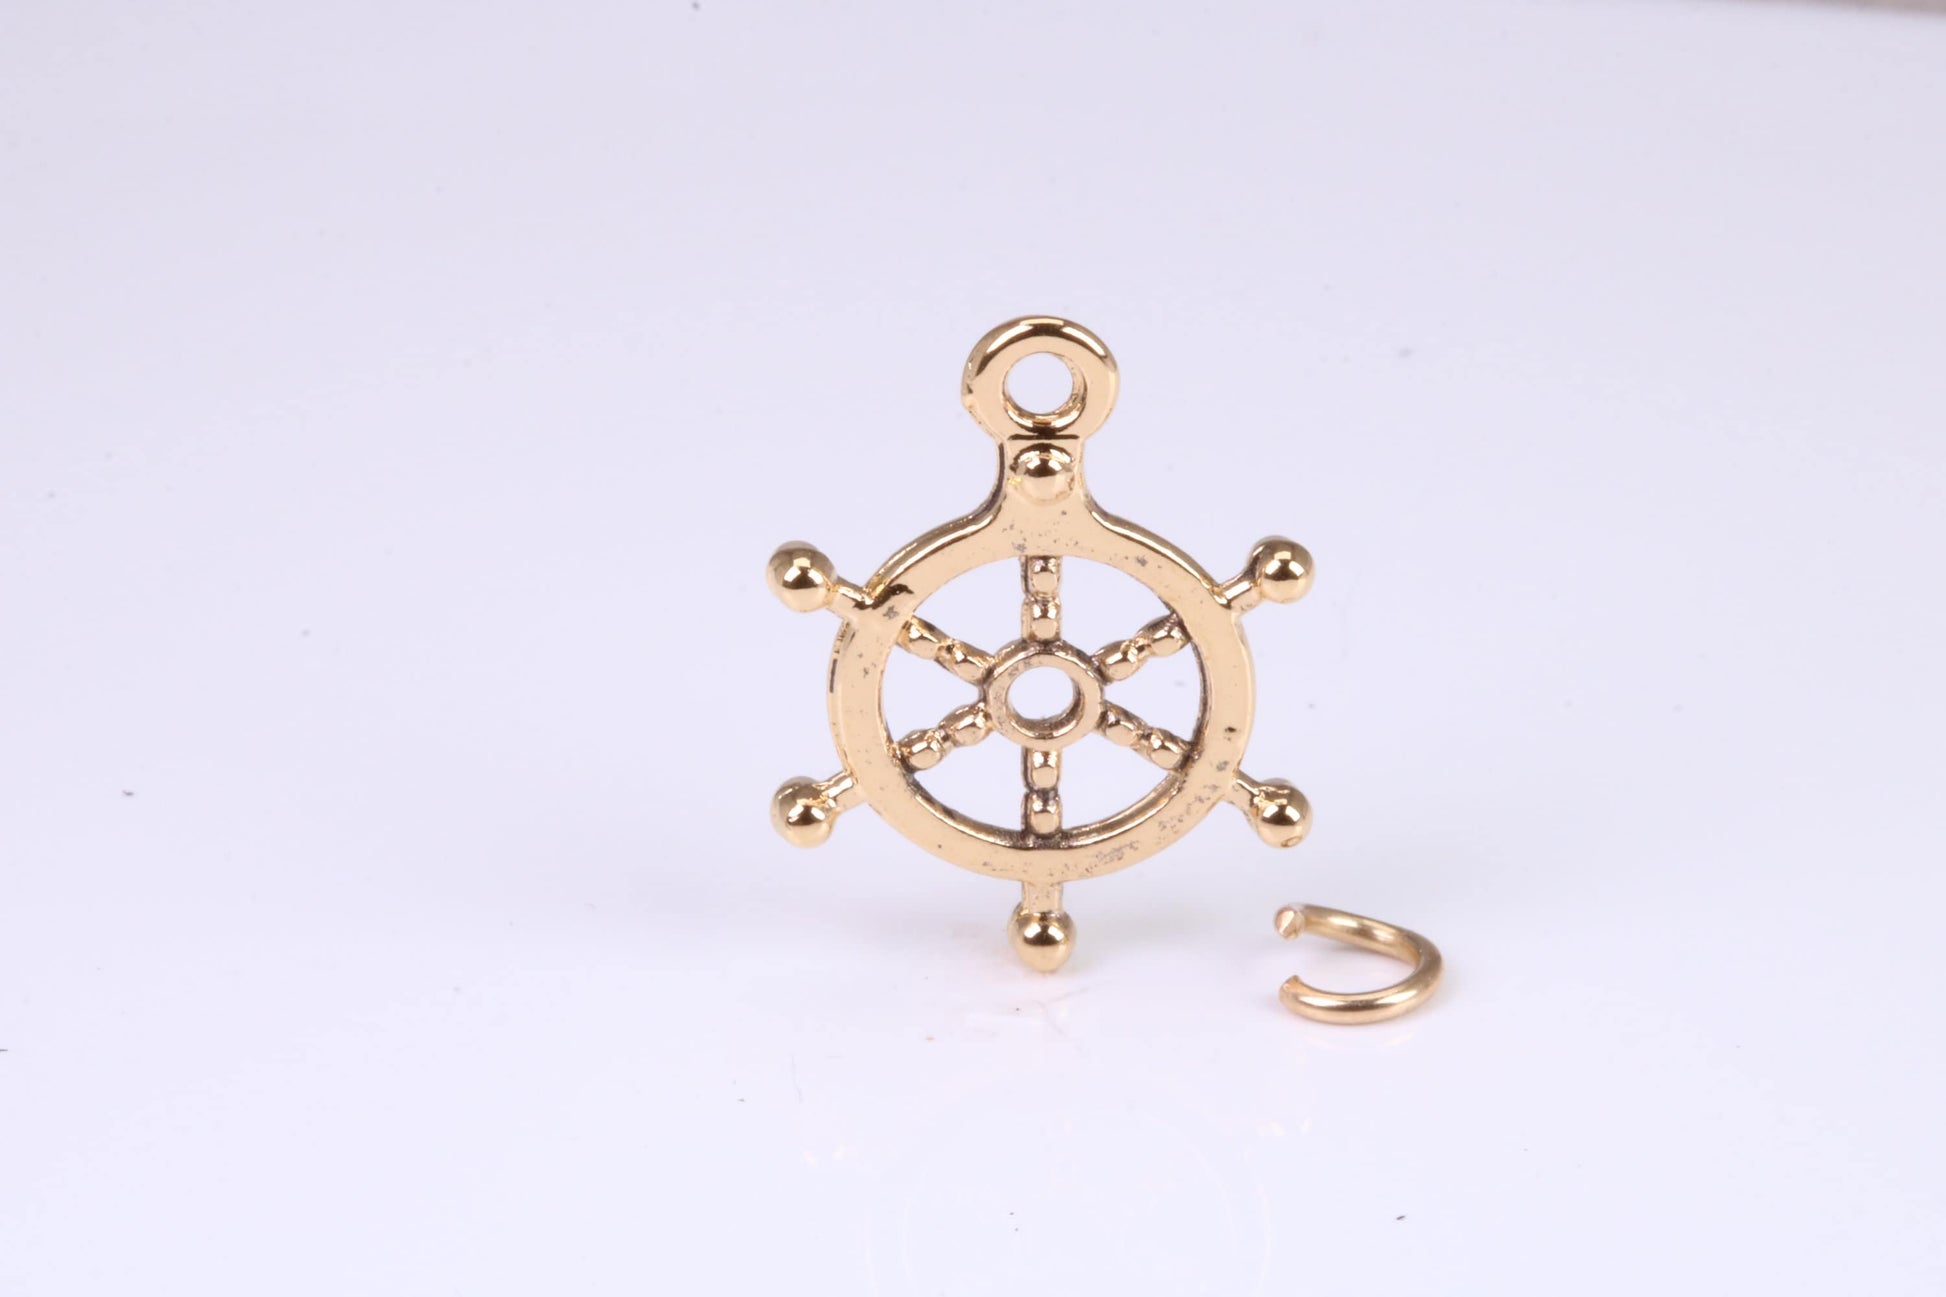 Helm Charm, Traditional Charm, Made from Solid Yellow Gold, British Hallmarked, Complete with Attachment Link